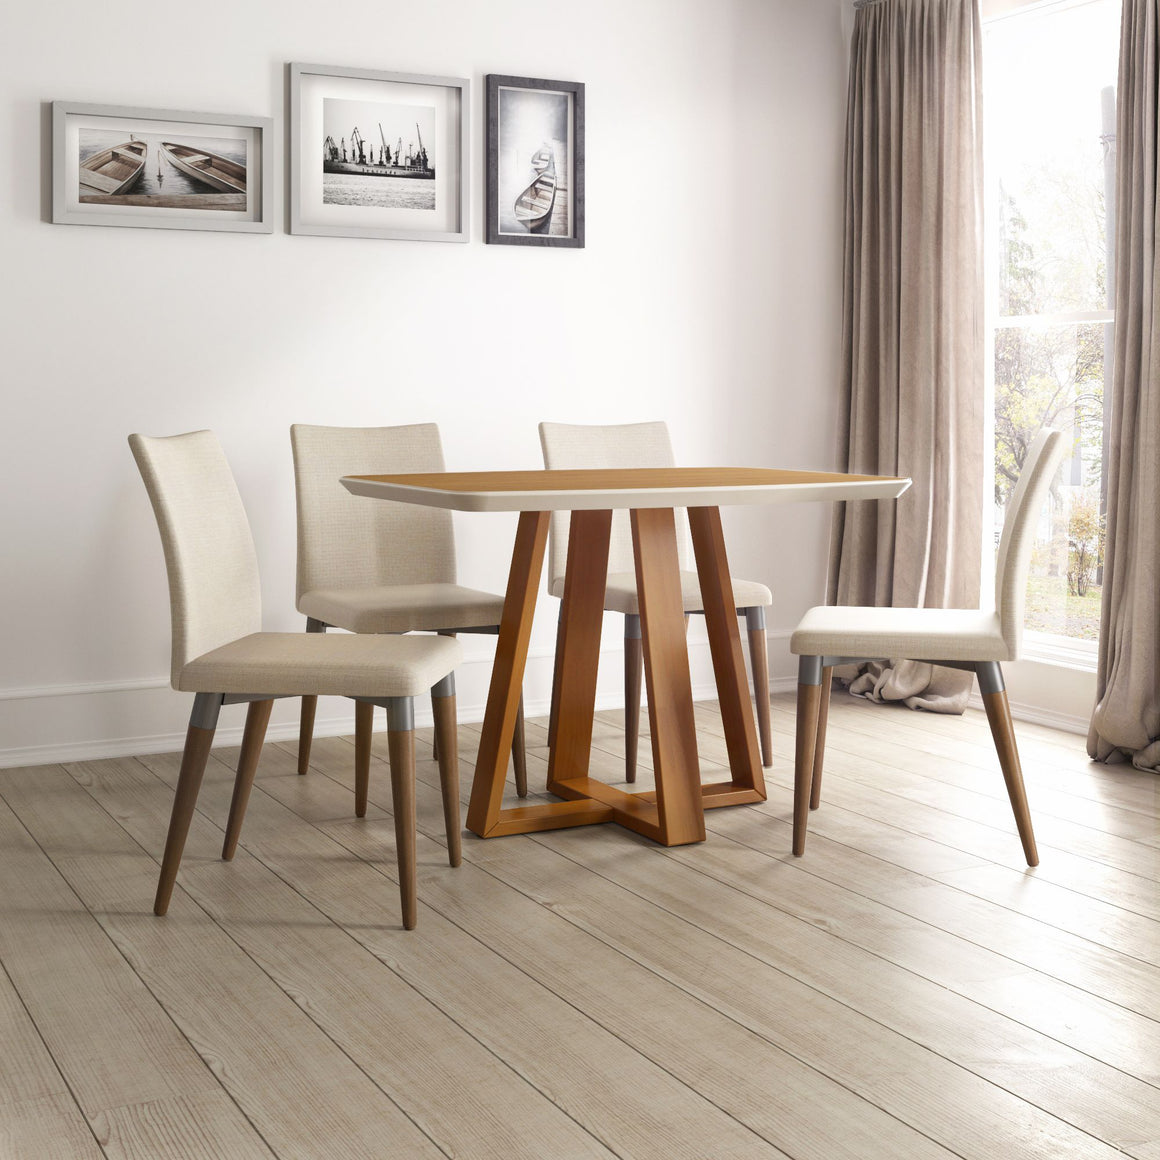 Duffy 62.99 Modern Rectangle Dining Table and Charles Dining Chair in Cinnamon Off White and Dark Beige - Set of 7